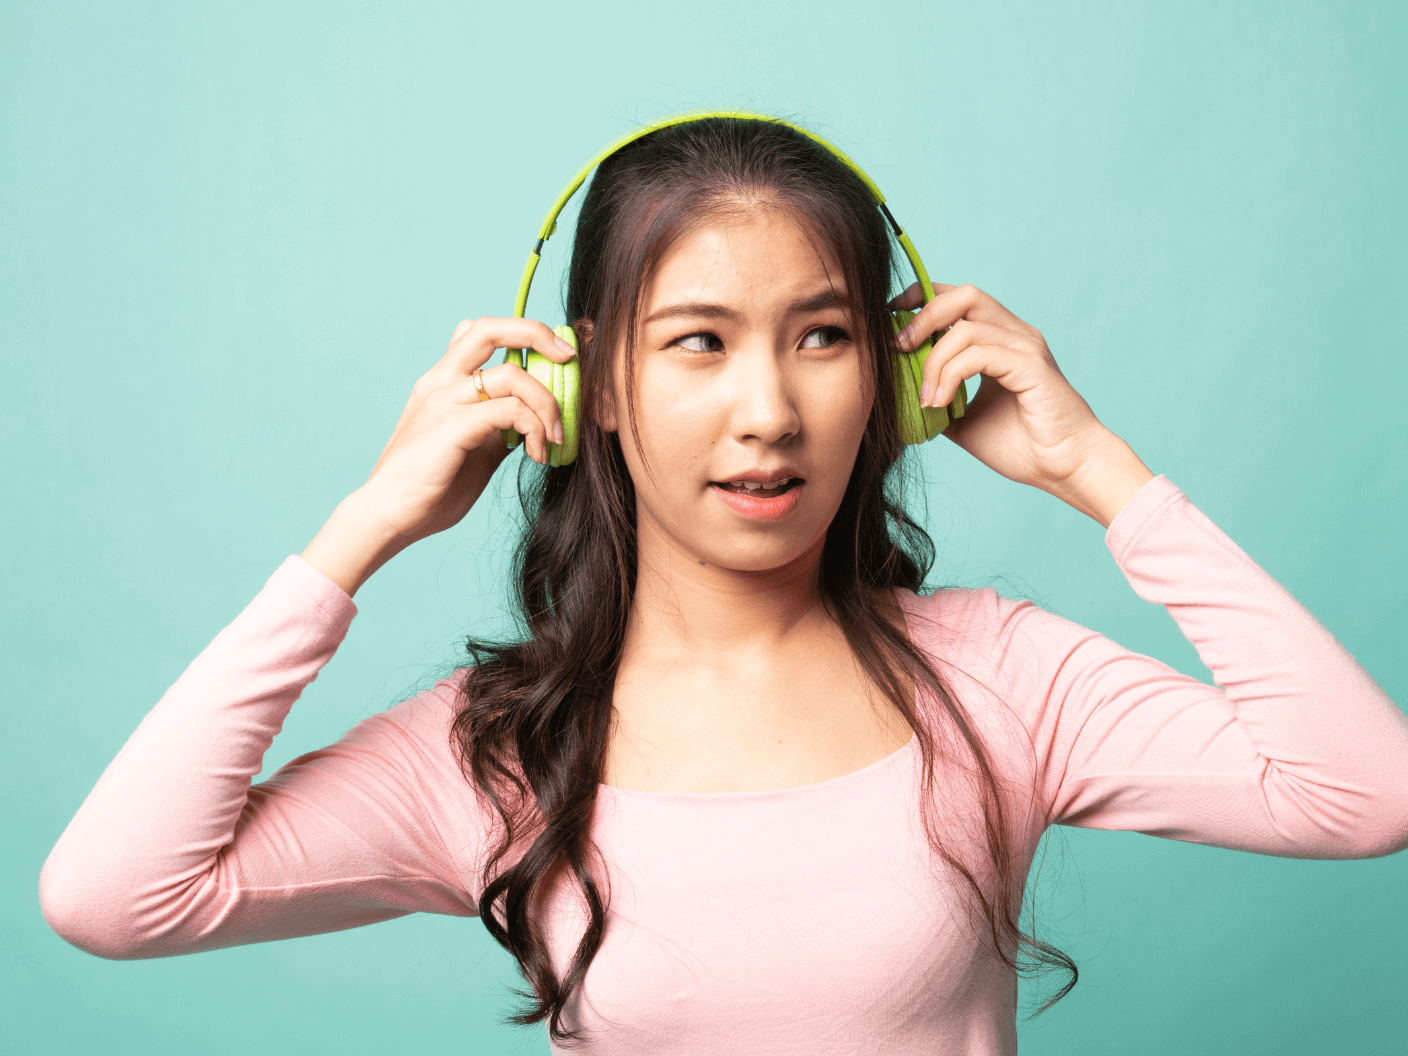 A teenager with ADHD and autism holds lime green headphones over her ears.